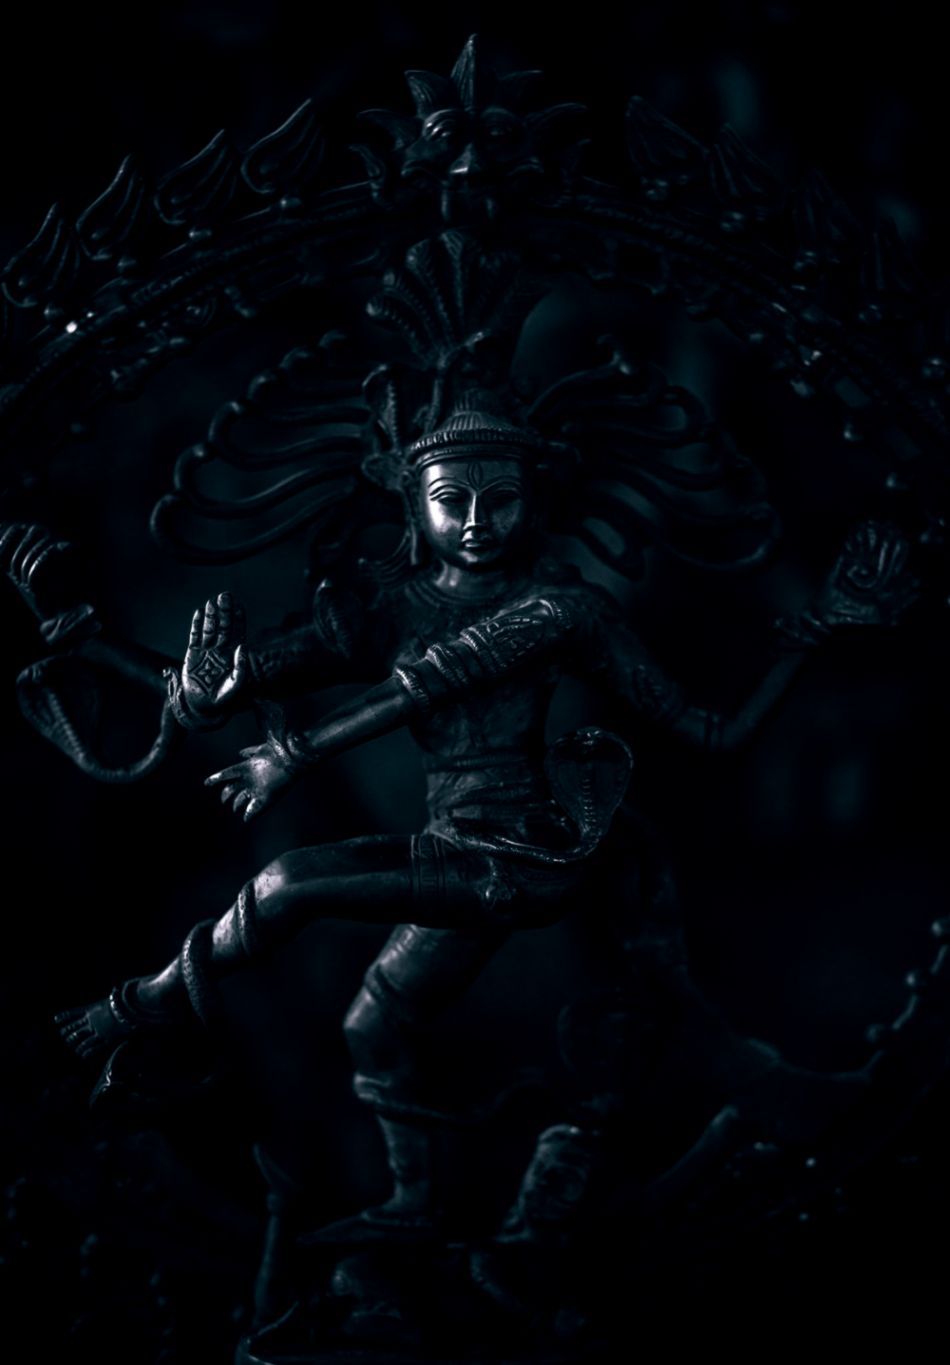  Lord Shiva Black Wallpapers Photos  MyGodImages